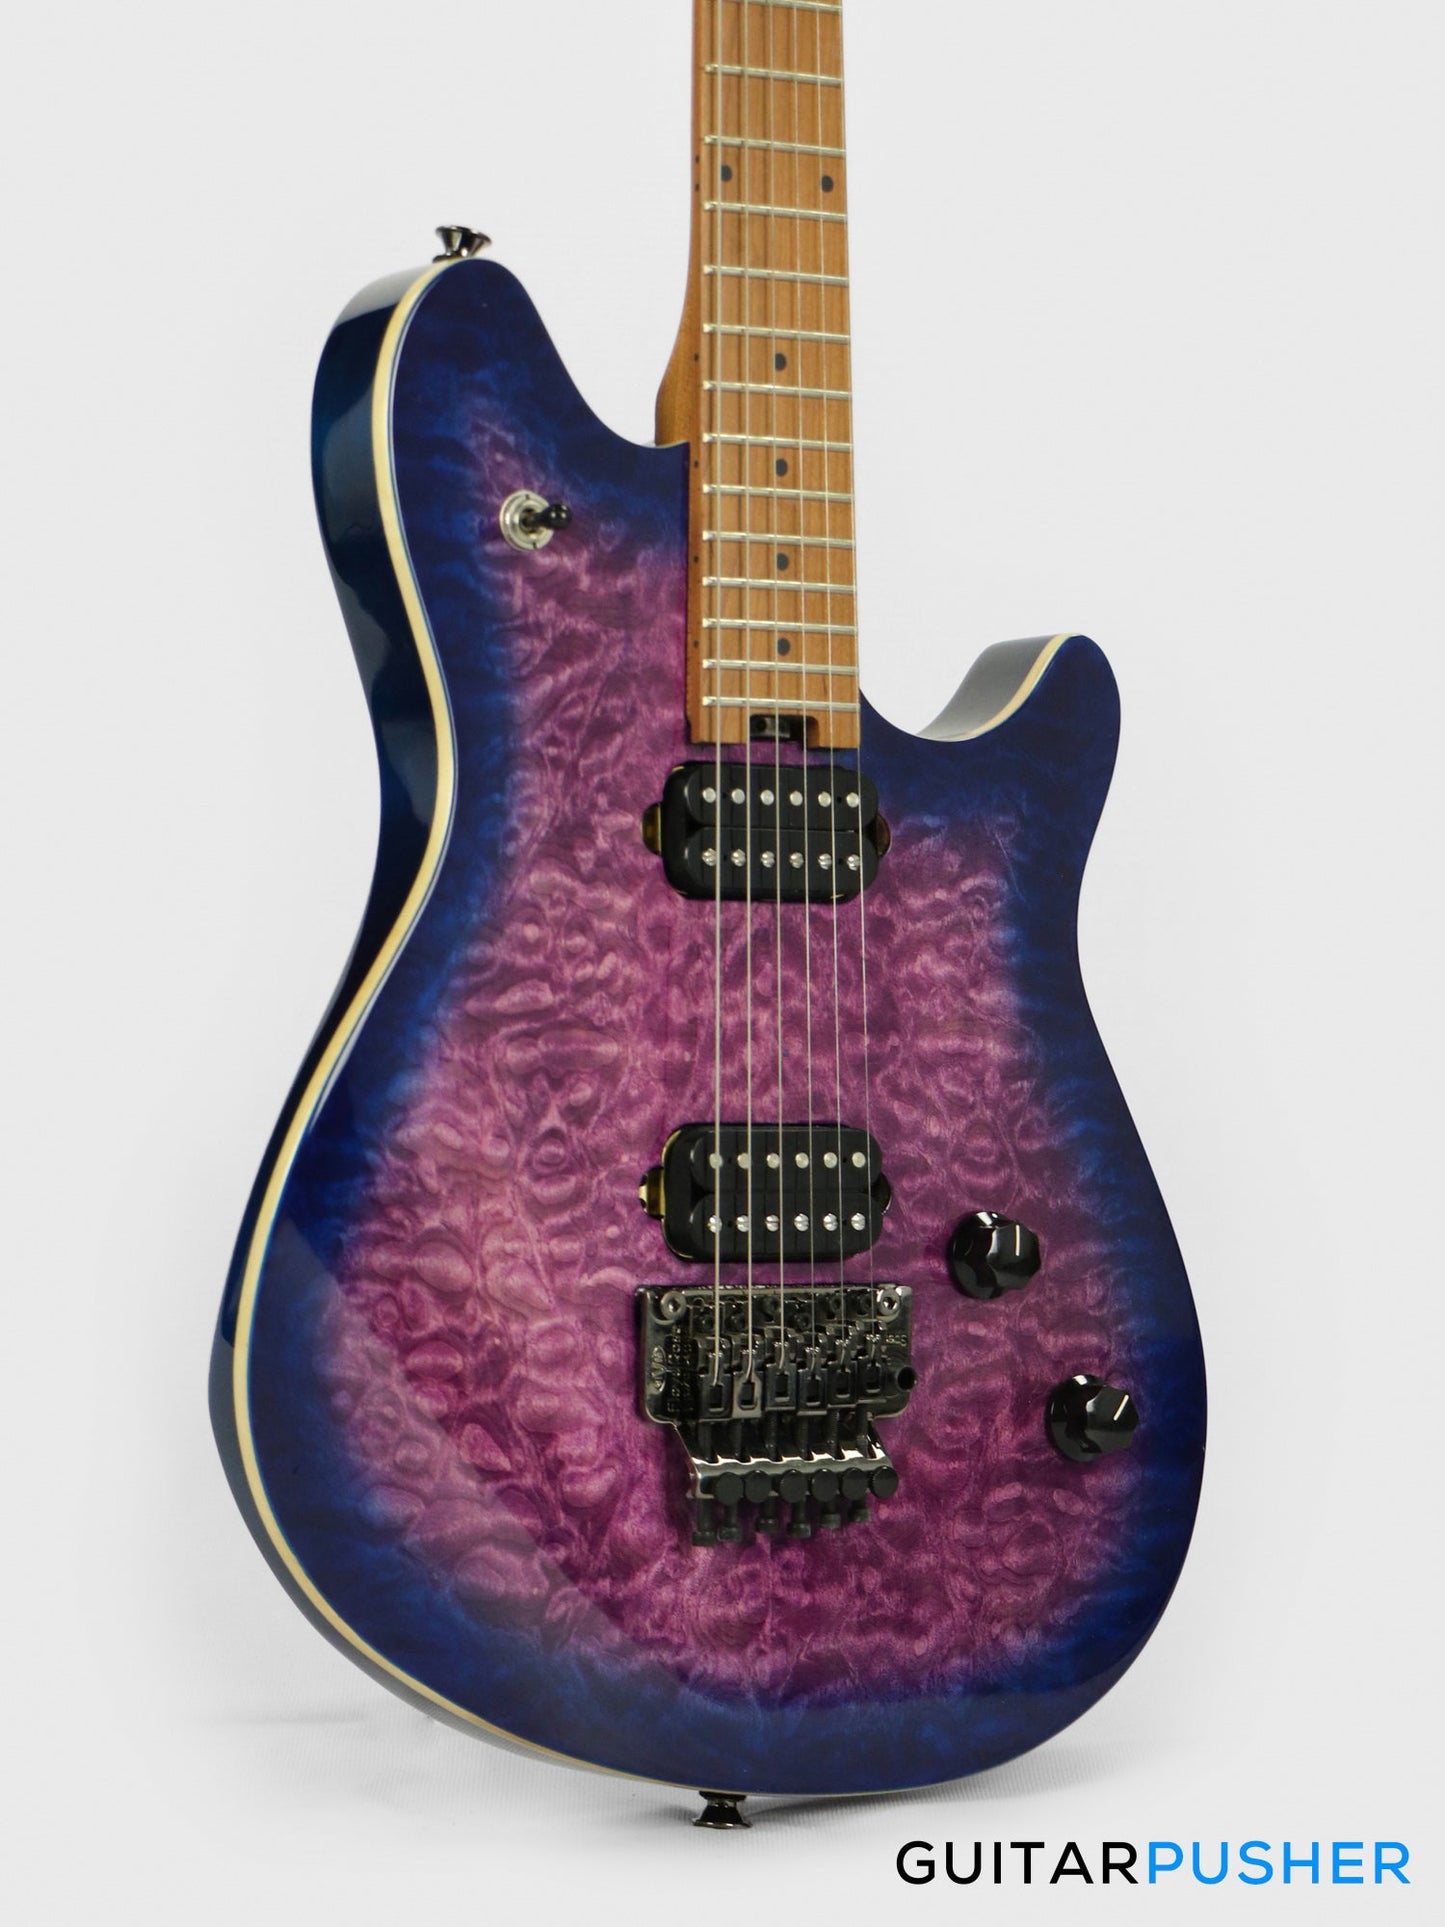 Wolfgang EVH WG QM (Quilted Maple) Standard Electric Guitar - Northern Lights